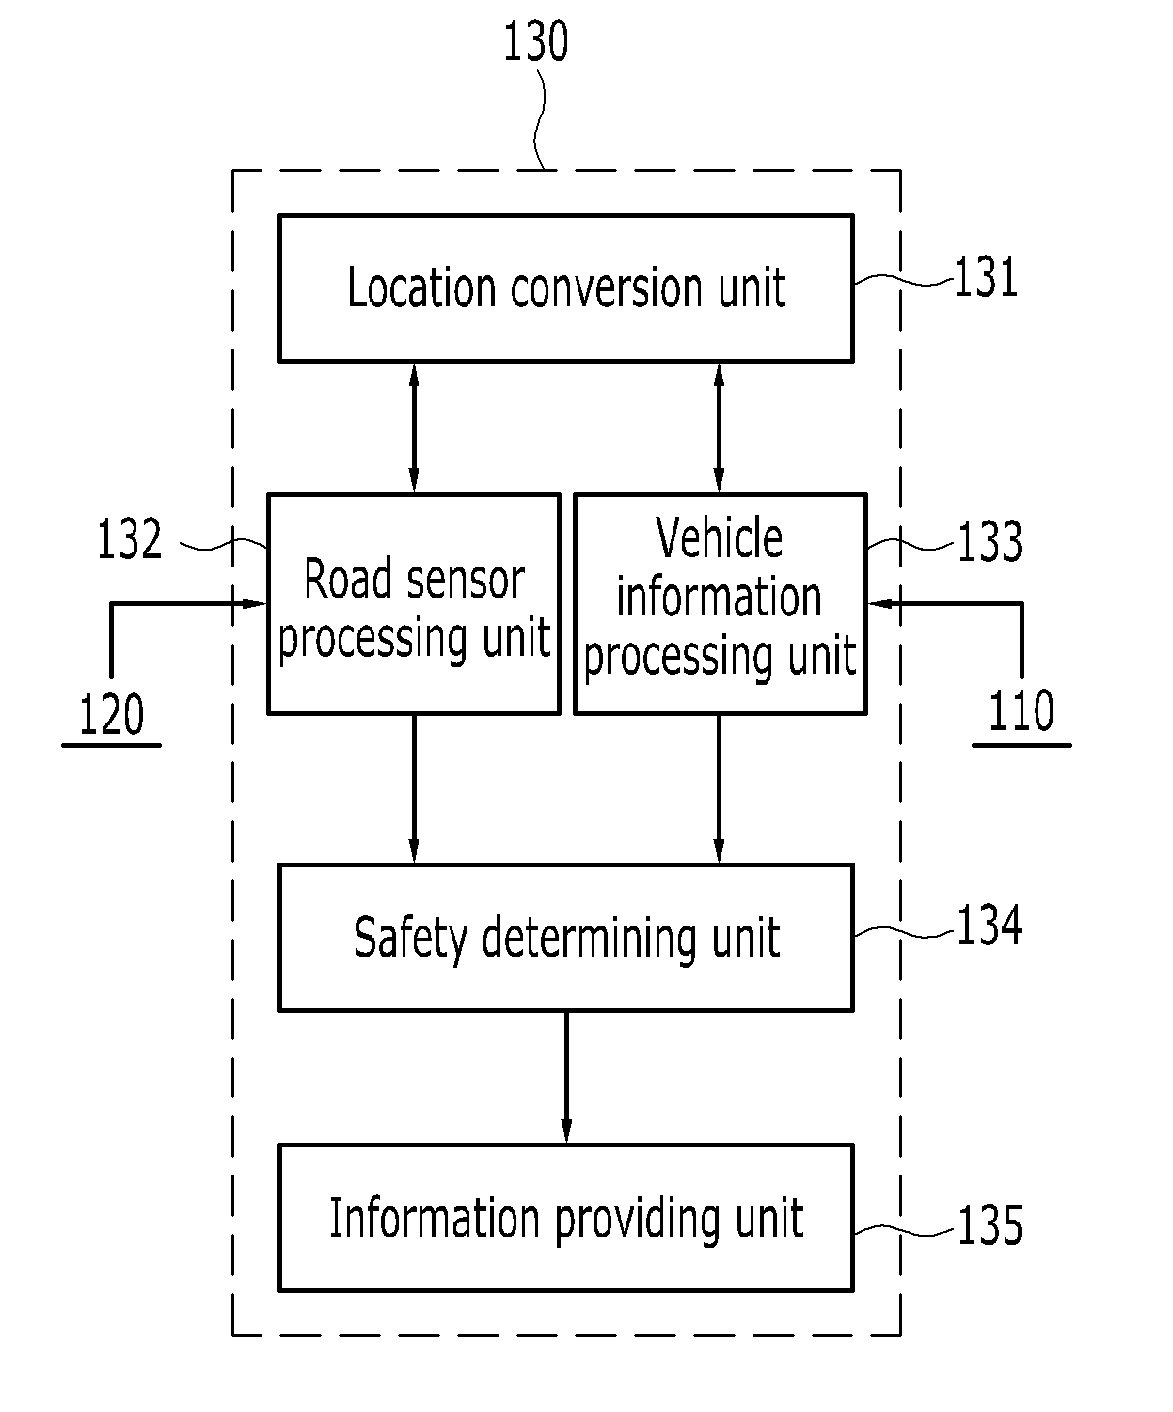 System and method for providing vehicular safety service